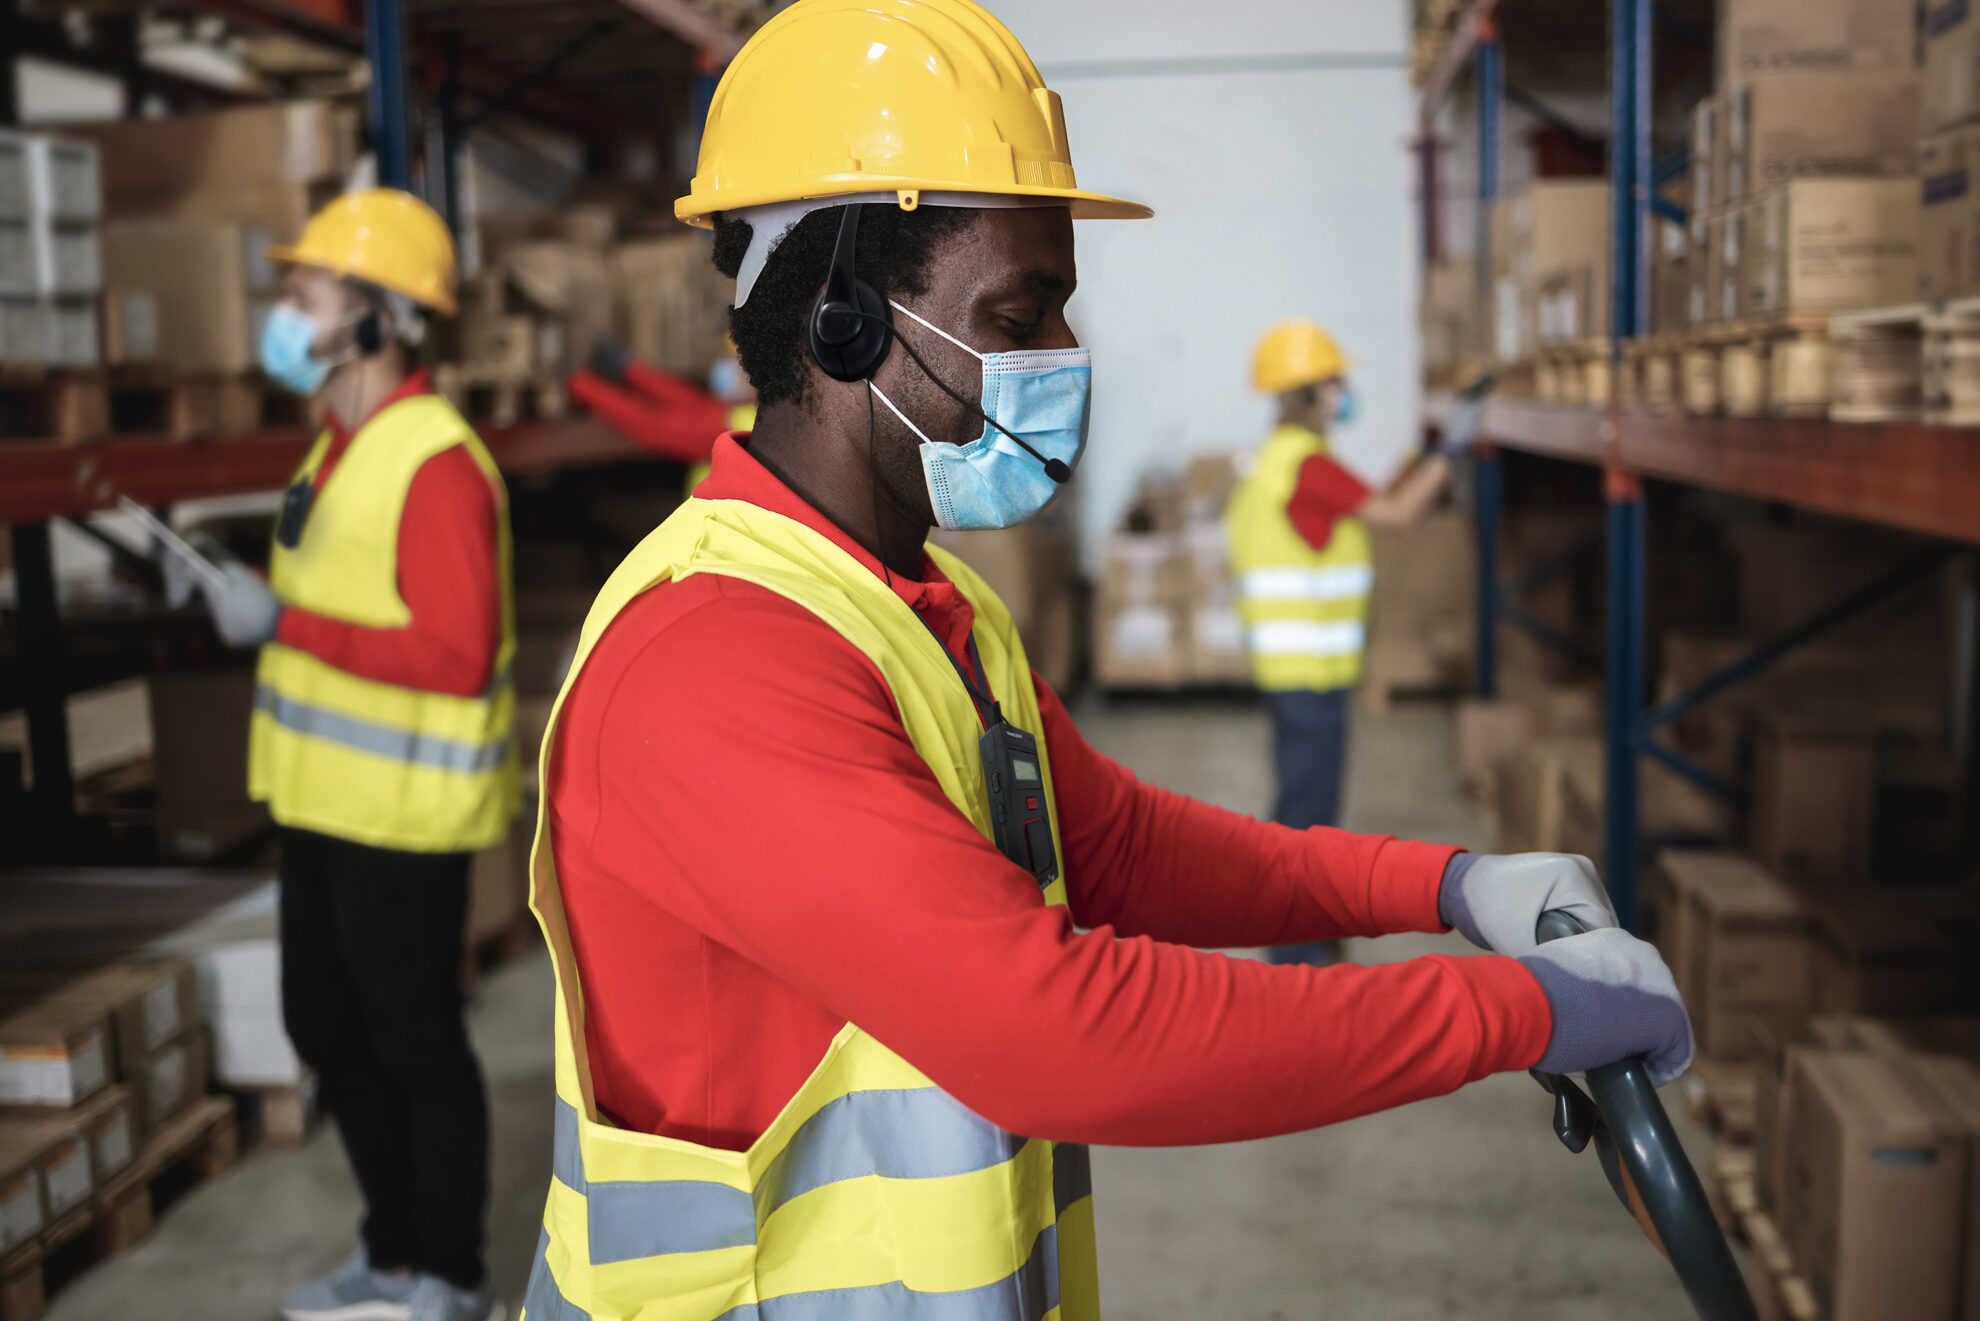 warehouse worker loading delivery boxes while wearing mask